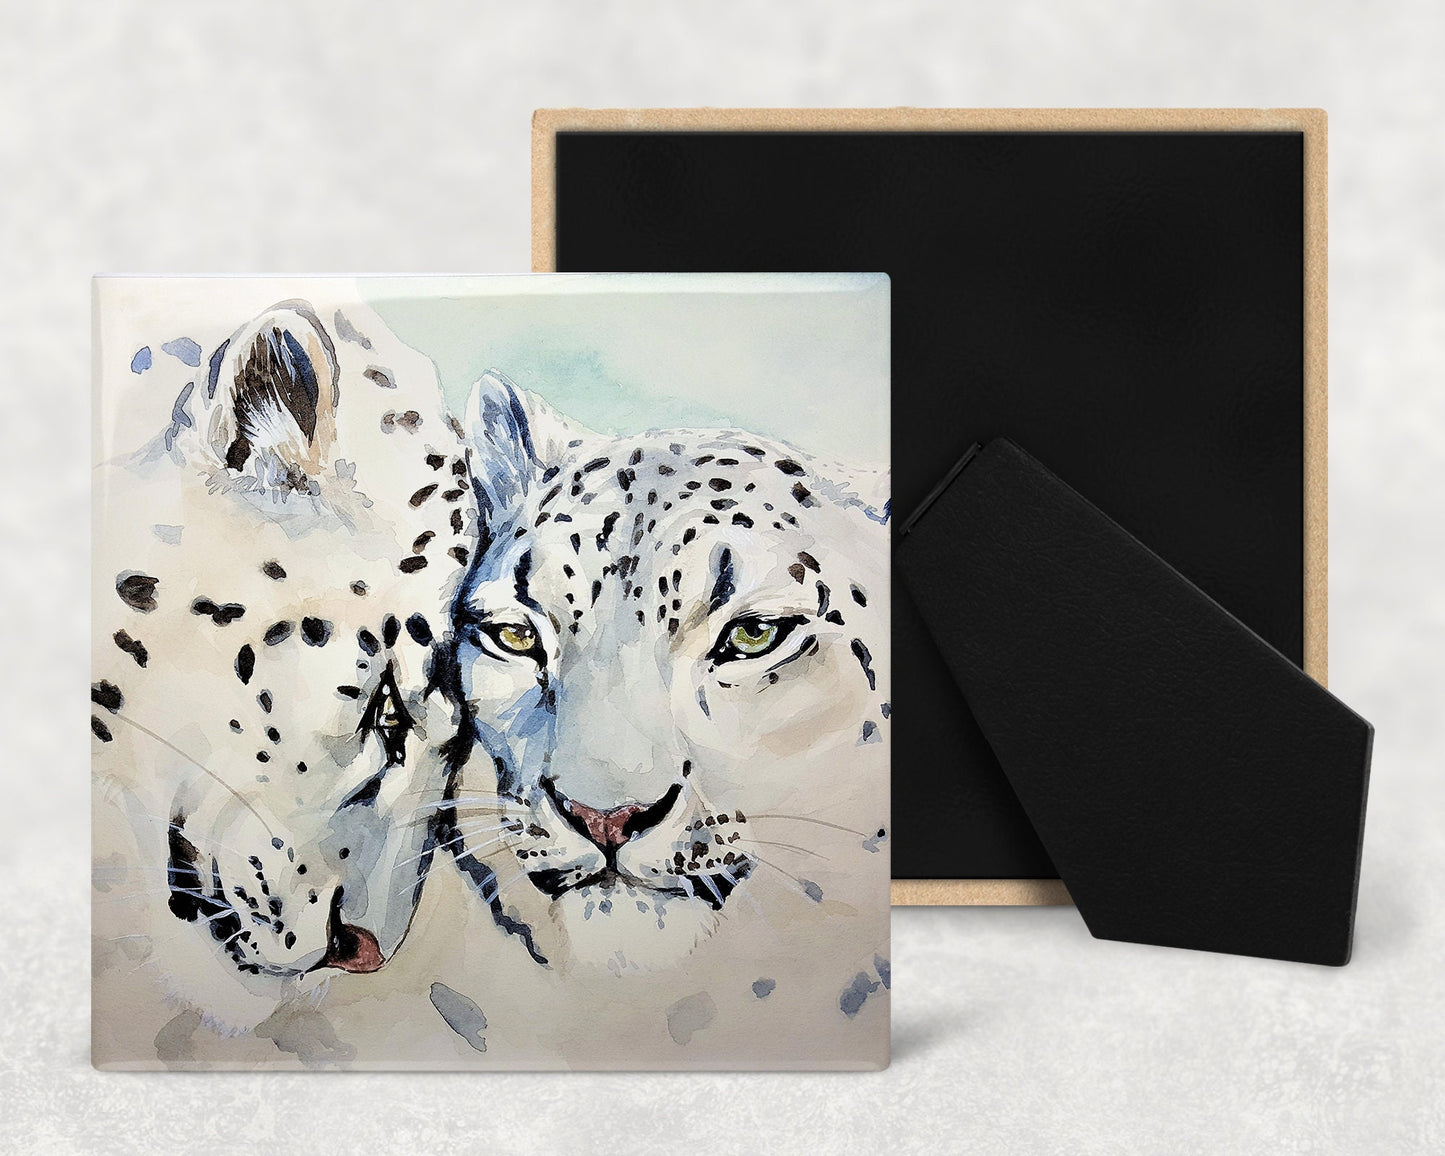 Snow Leopards Art Decorative Ceramic Tile with Optional Easel Back - Available in 3 Sizes